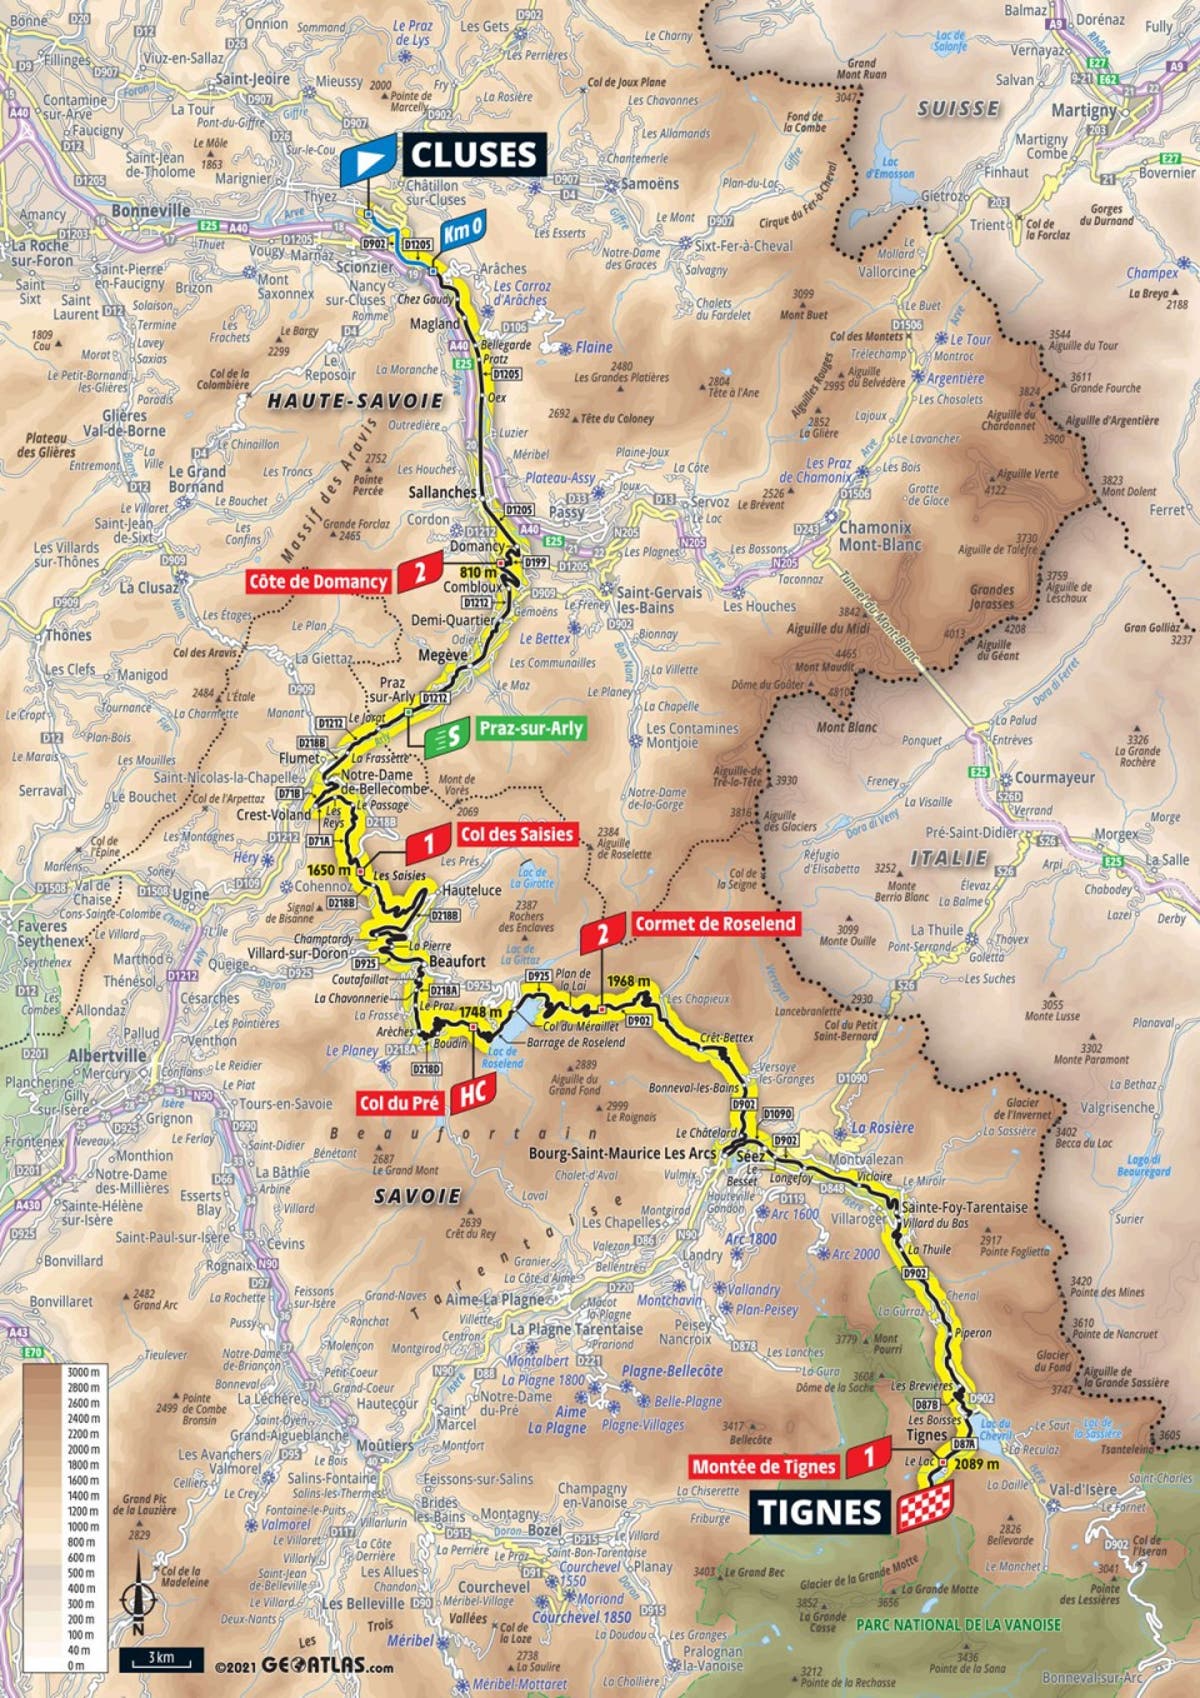 SPORTS CIRCUS INT. Twitter: "Tour de 2021: 9 map, profile, prediction and start time tomorrow https://t.co/zXBiA7ZhCb https://t.co/Q4km1pLJWL" / Twitter